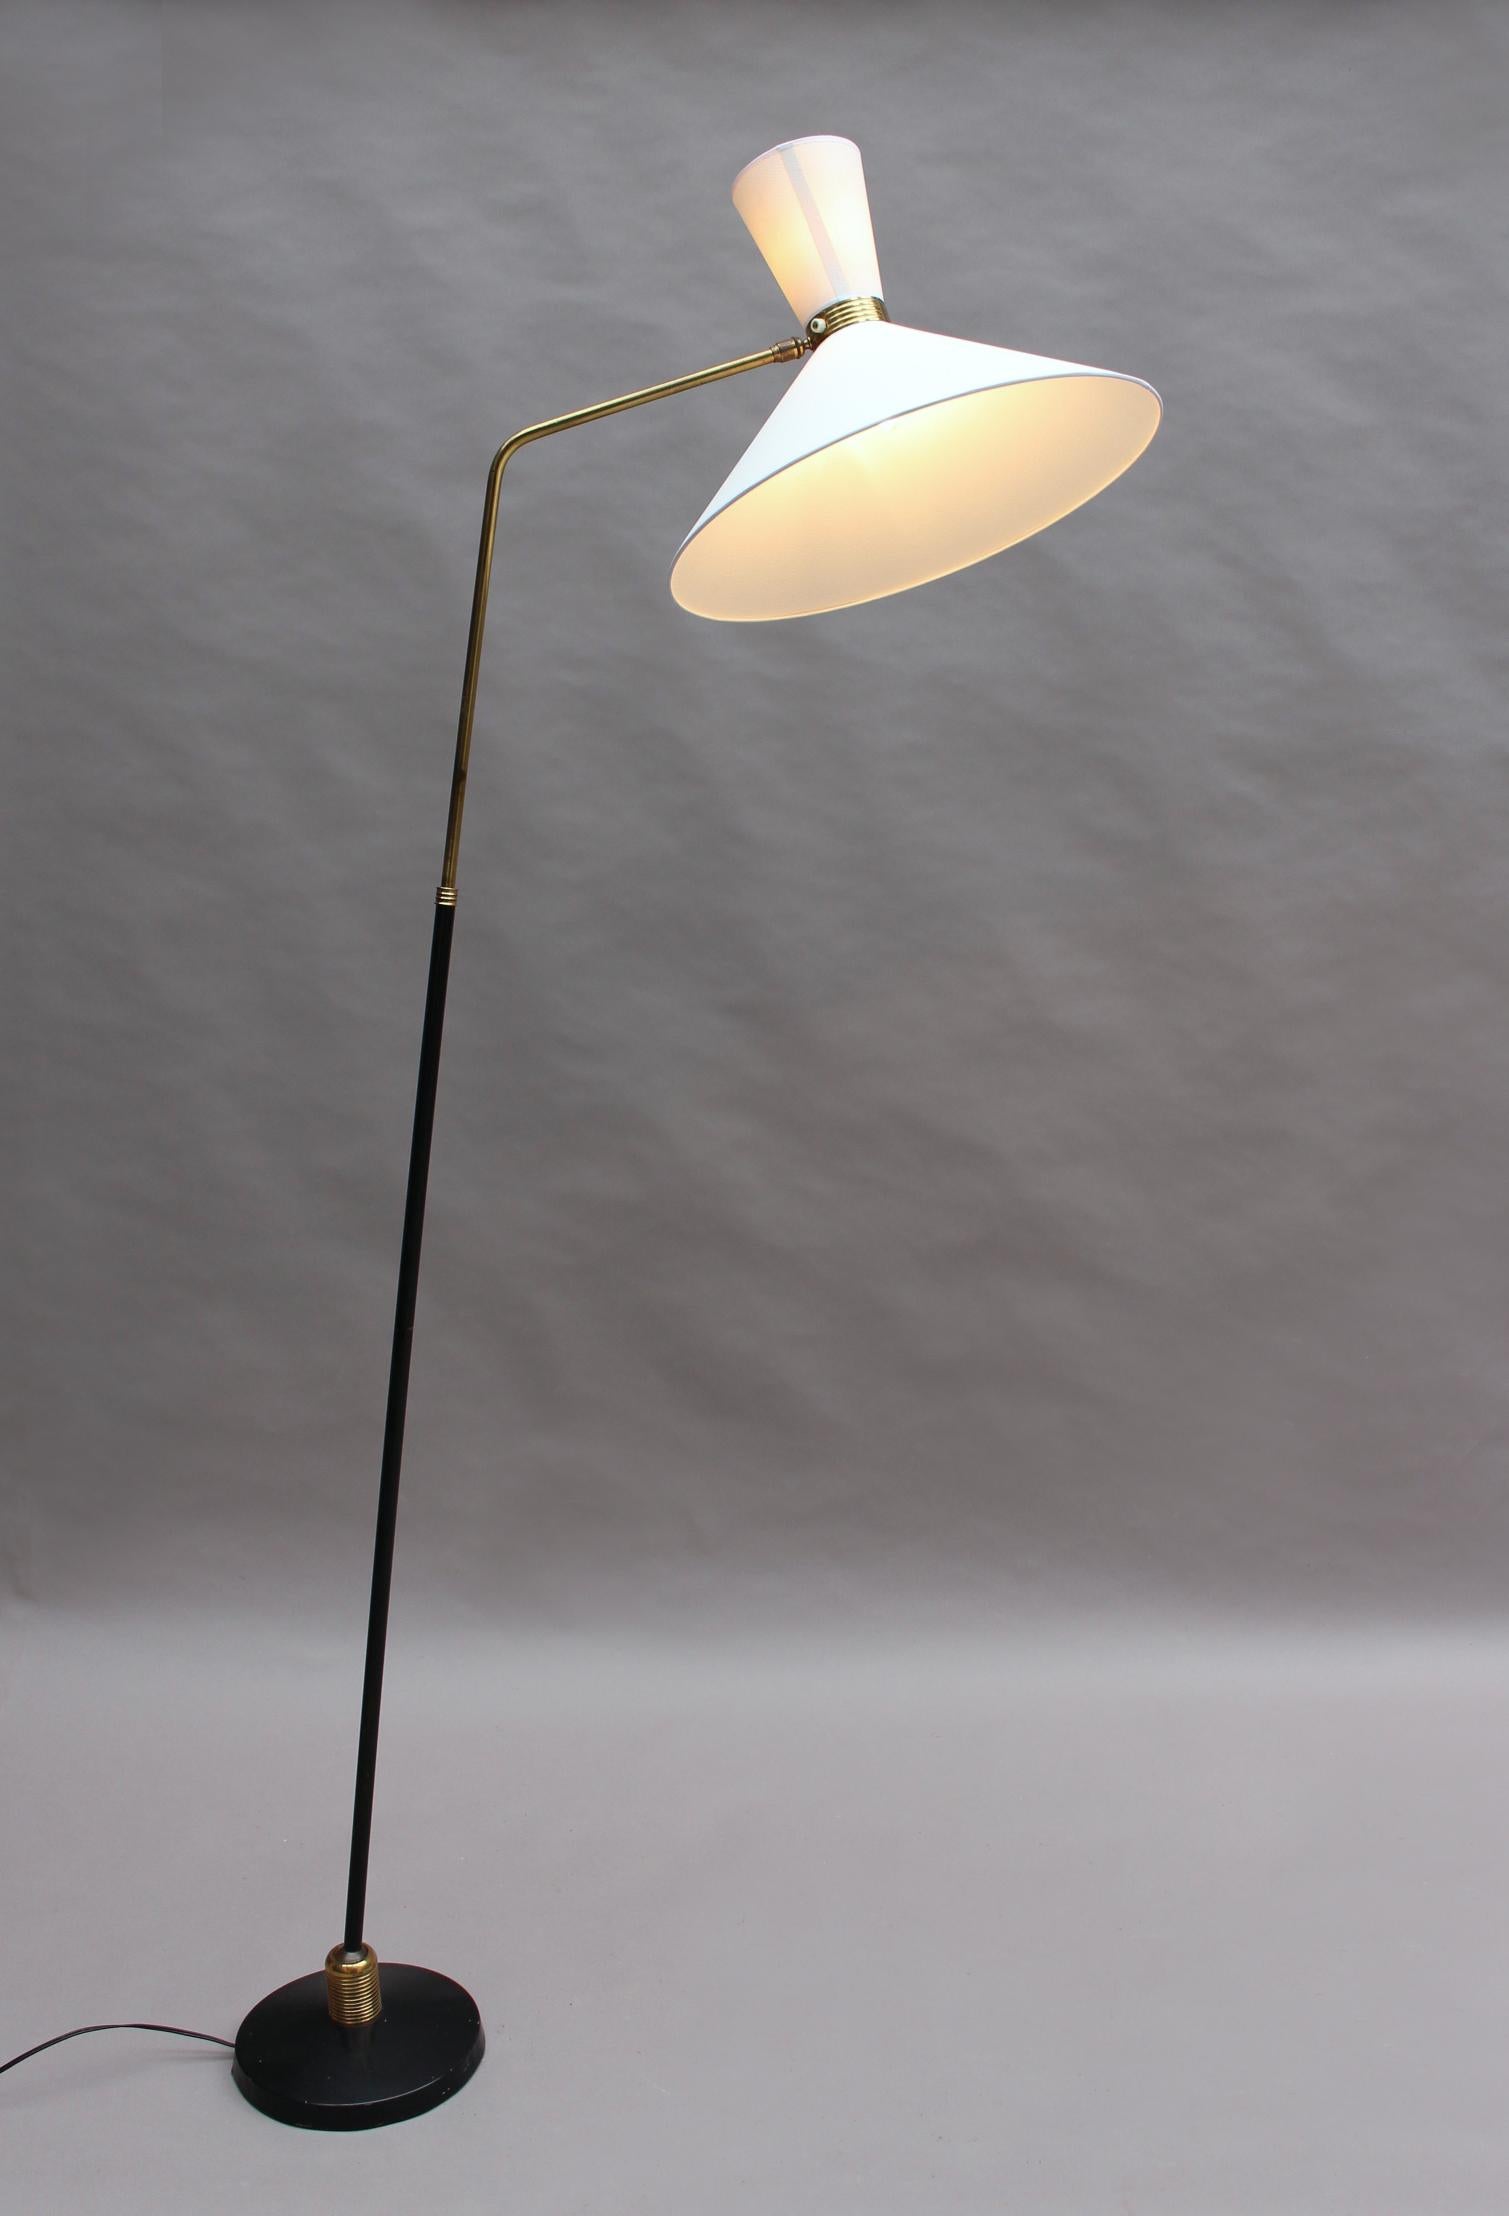 Made of black lacquered metal and brass, with a (new) articulate diabolo shade and adjustable stem. By Maison Lunel.